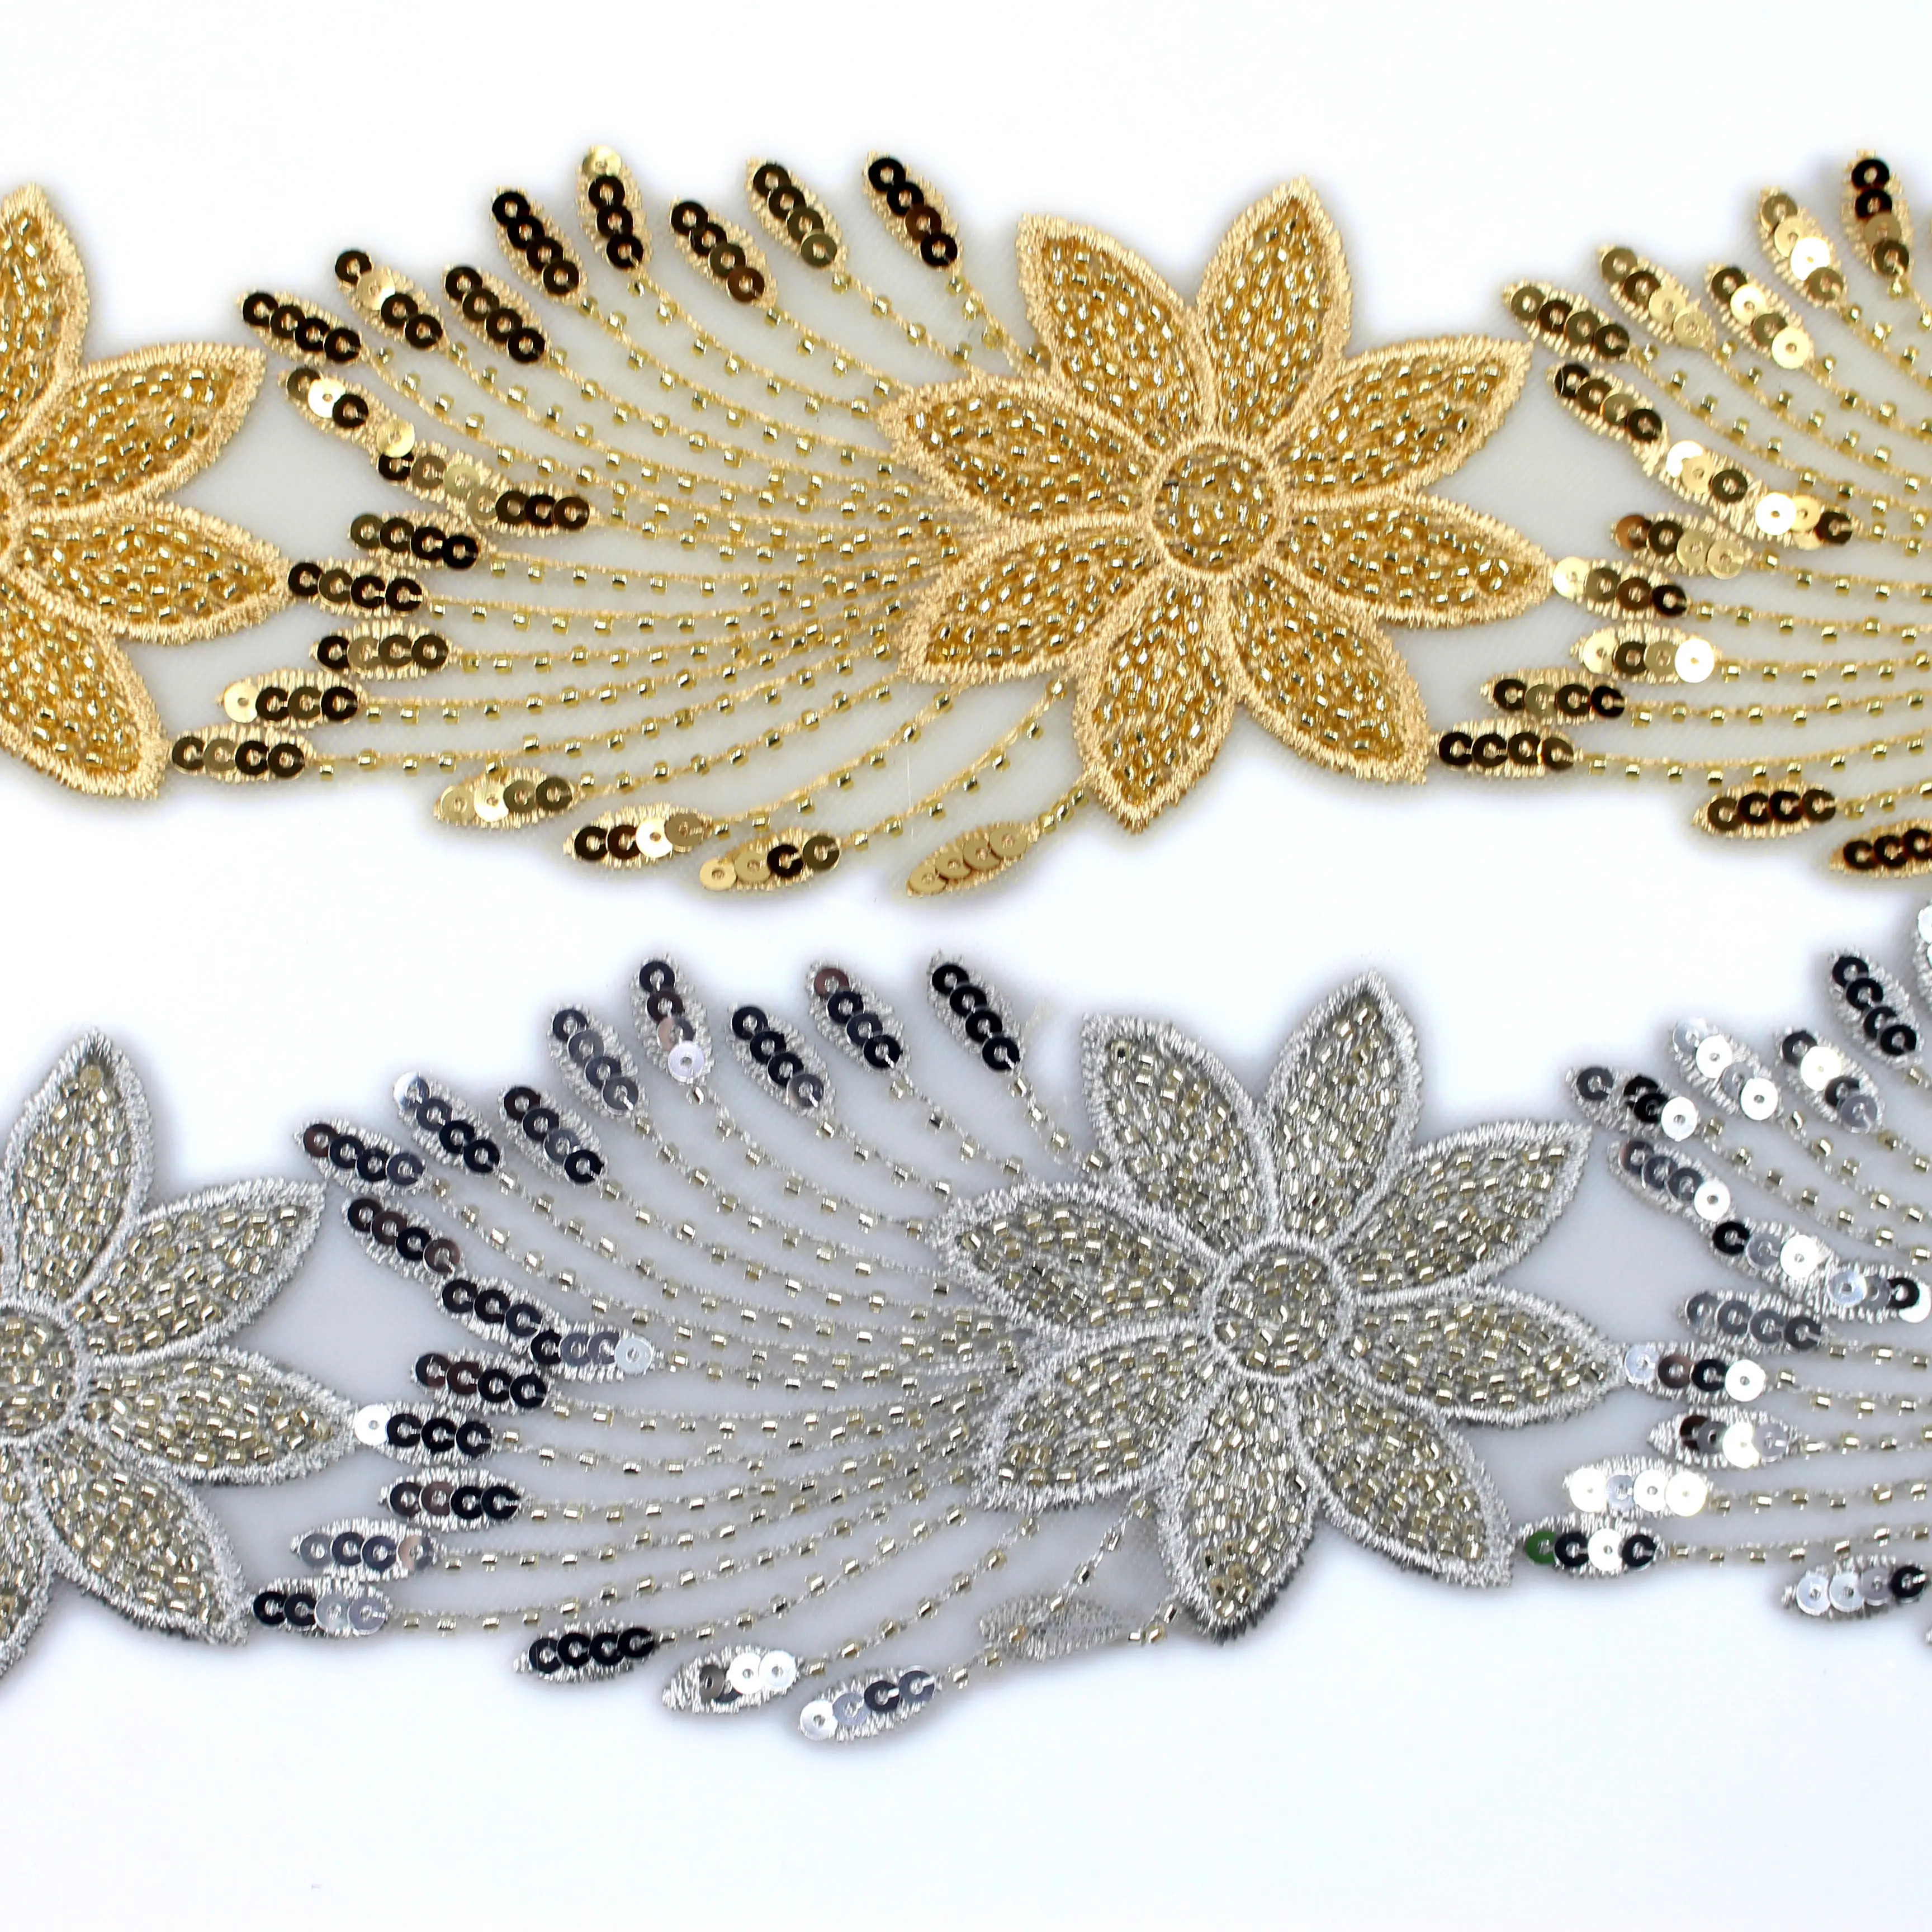 Hand-sewn beads lace handmade clothing accessories lace trim handmade beaded decorative accessories materials